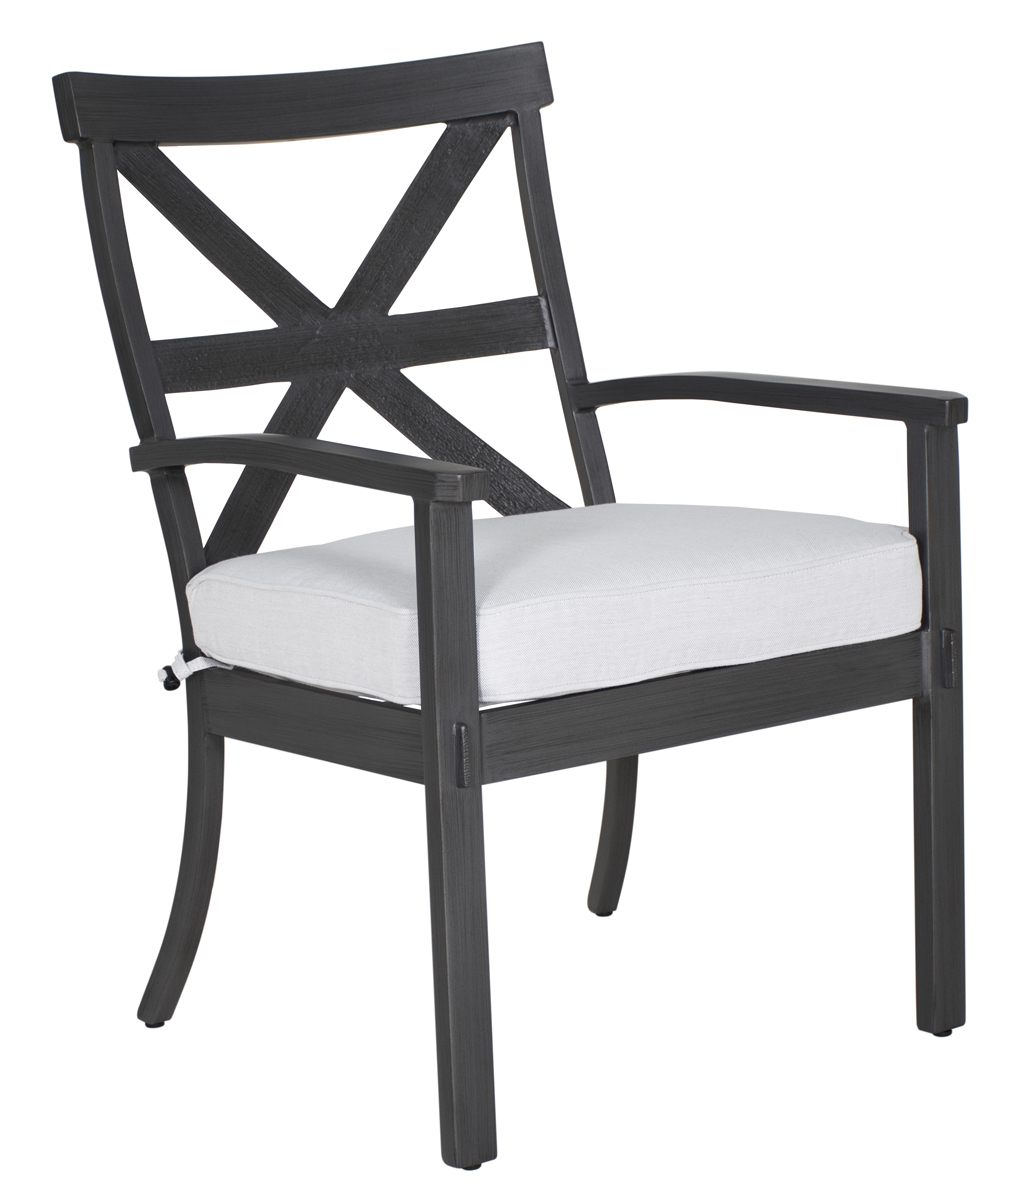 Castelle Antler Hill Formal Dining Chair